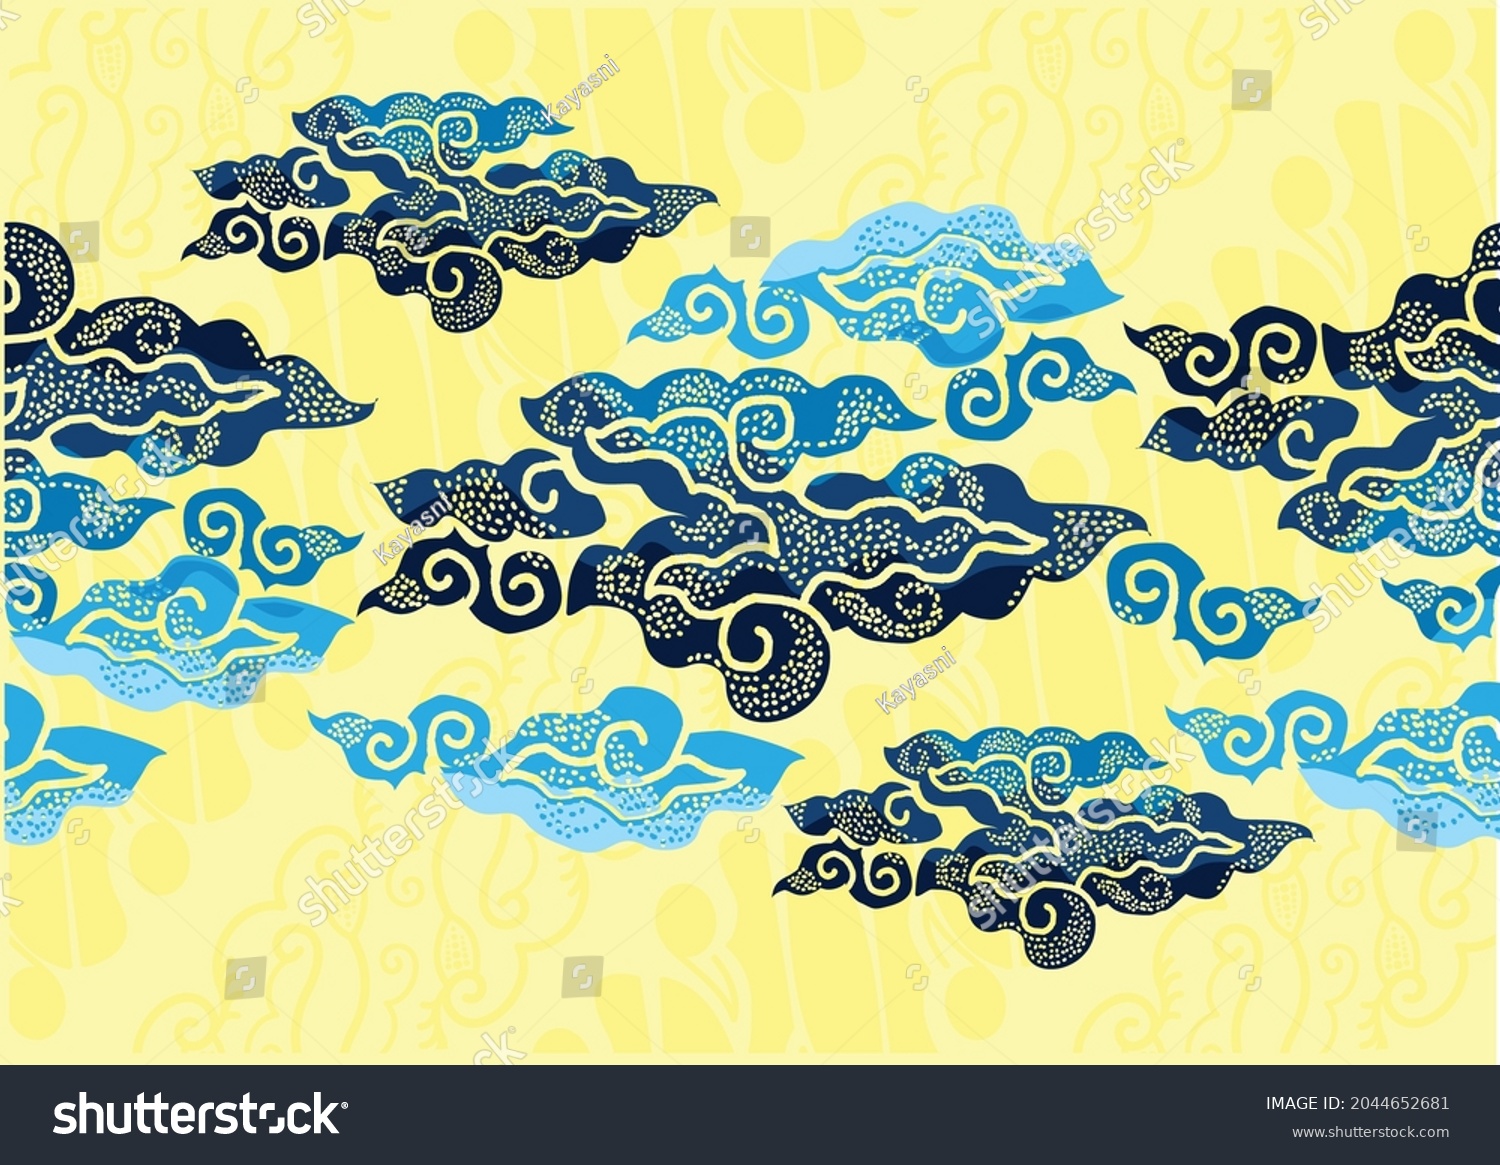 SVG of Motif Mega Mendung, batik motif typical of West Java Indonesia, curved line pattern with cloud objects, with developments and various artistic colors svg